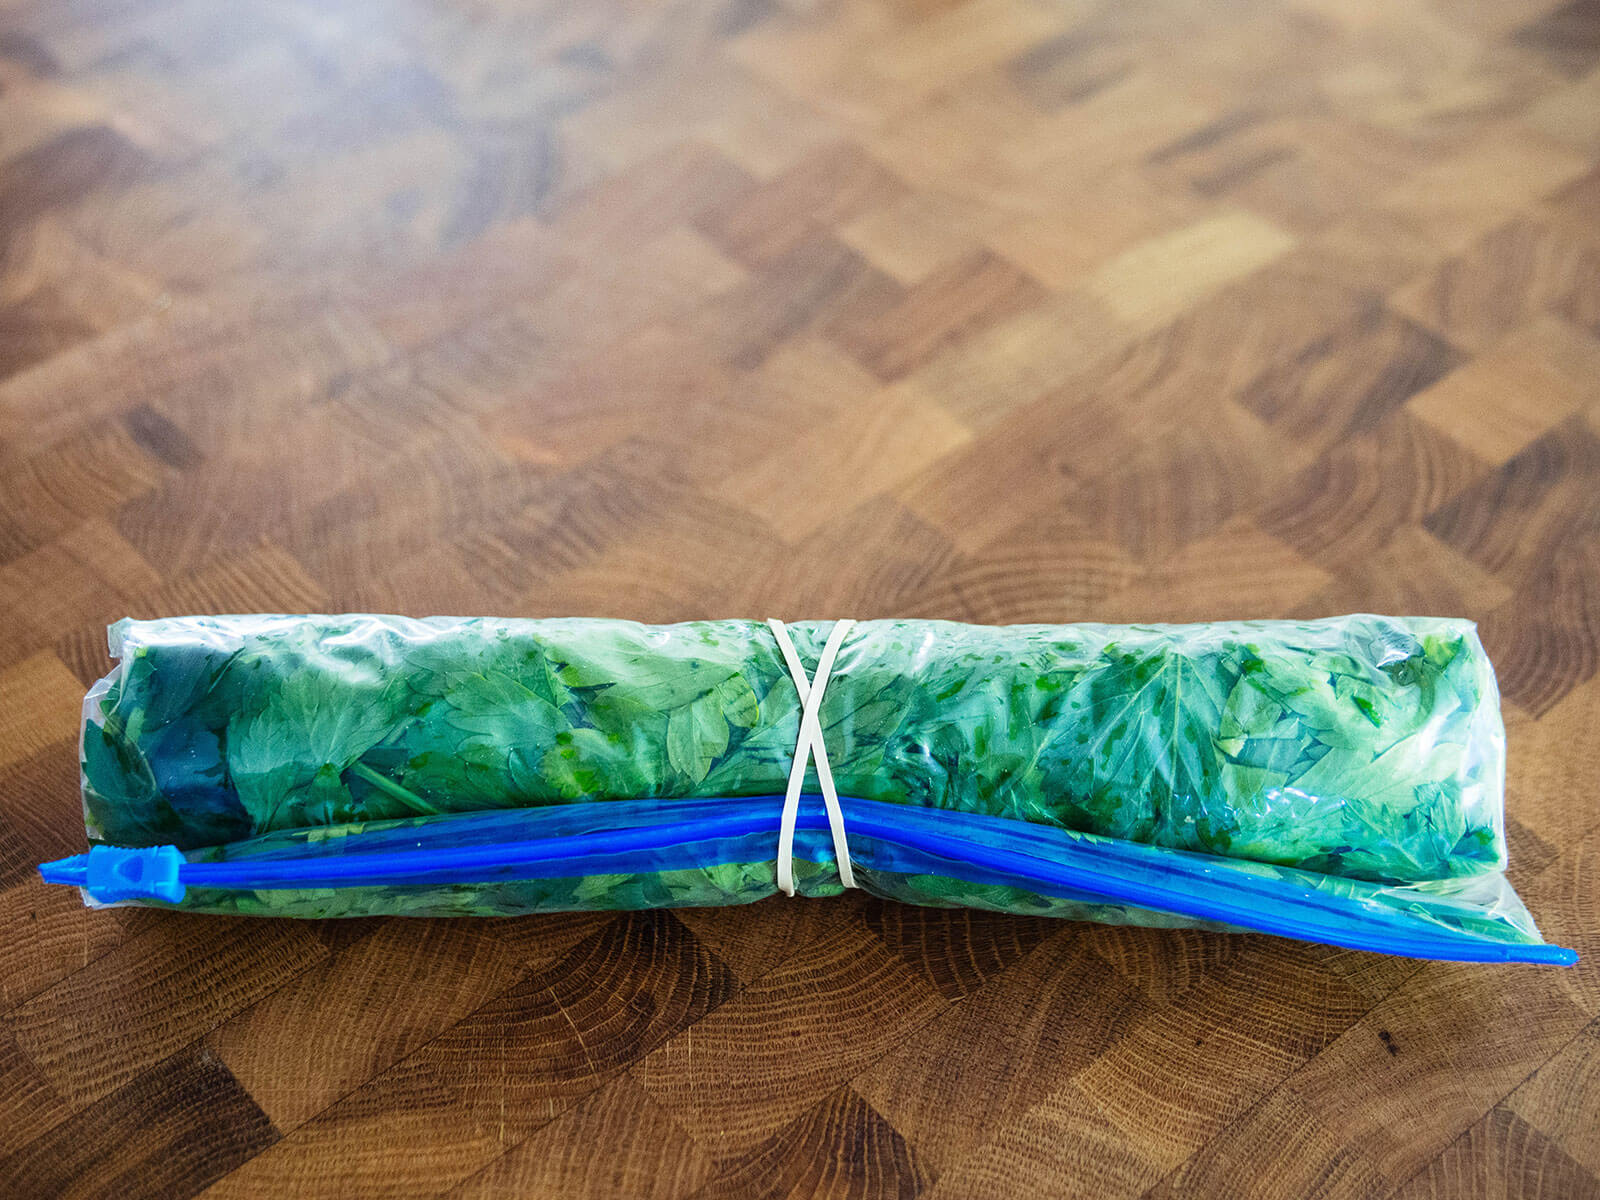 Rolled up freezer bag full of parsley leaves, wrapped with a rubberband